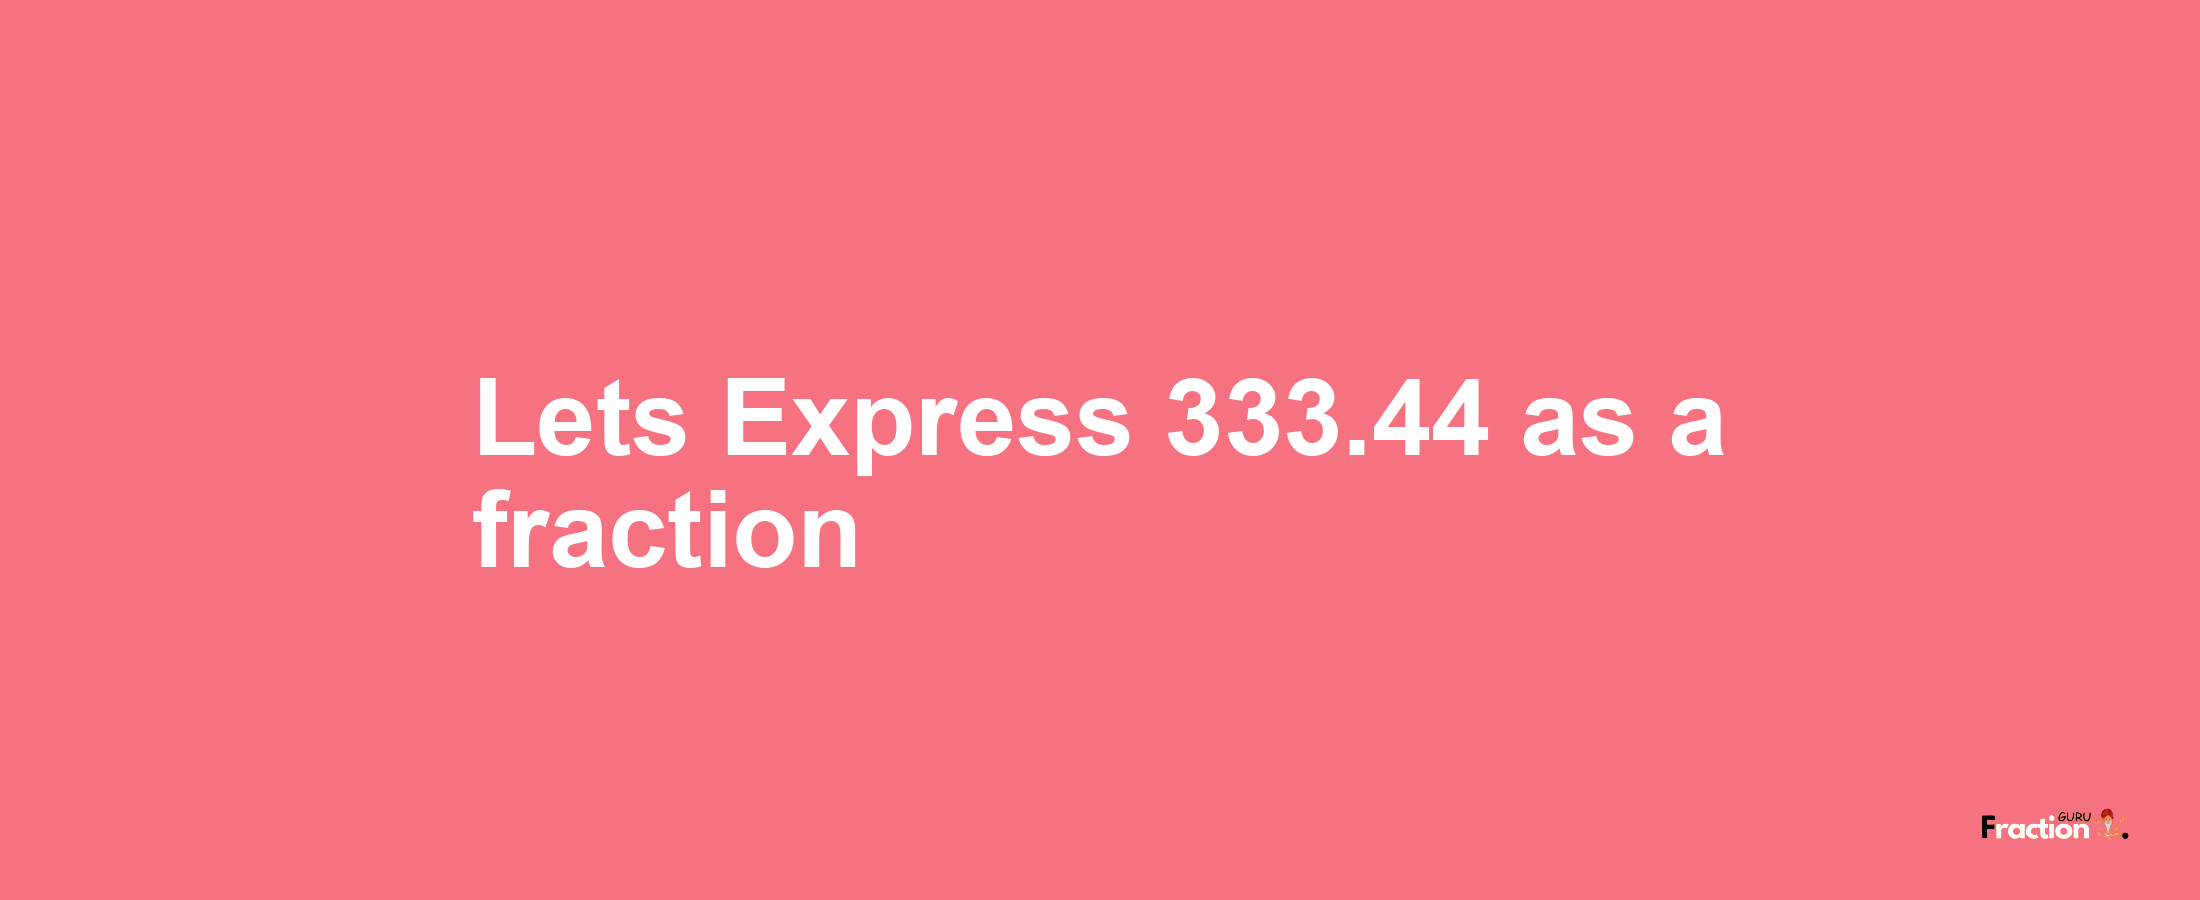 Lets Express 333.44 as afraction